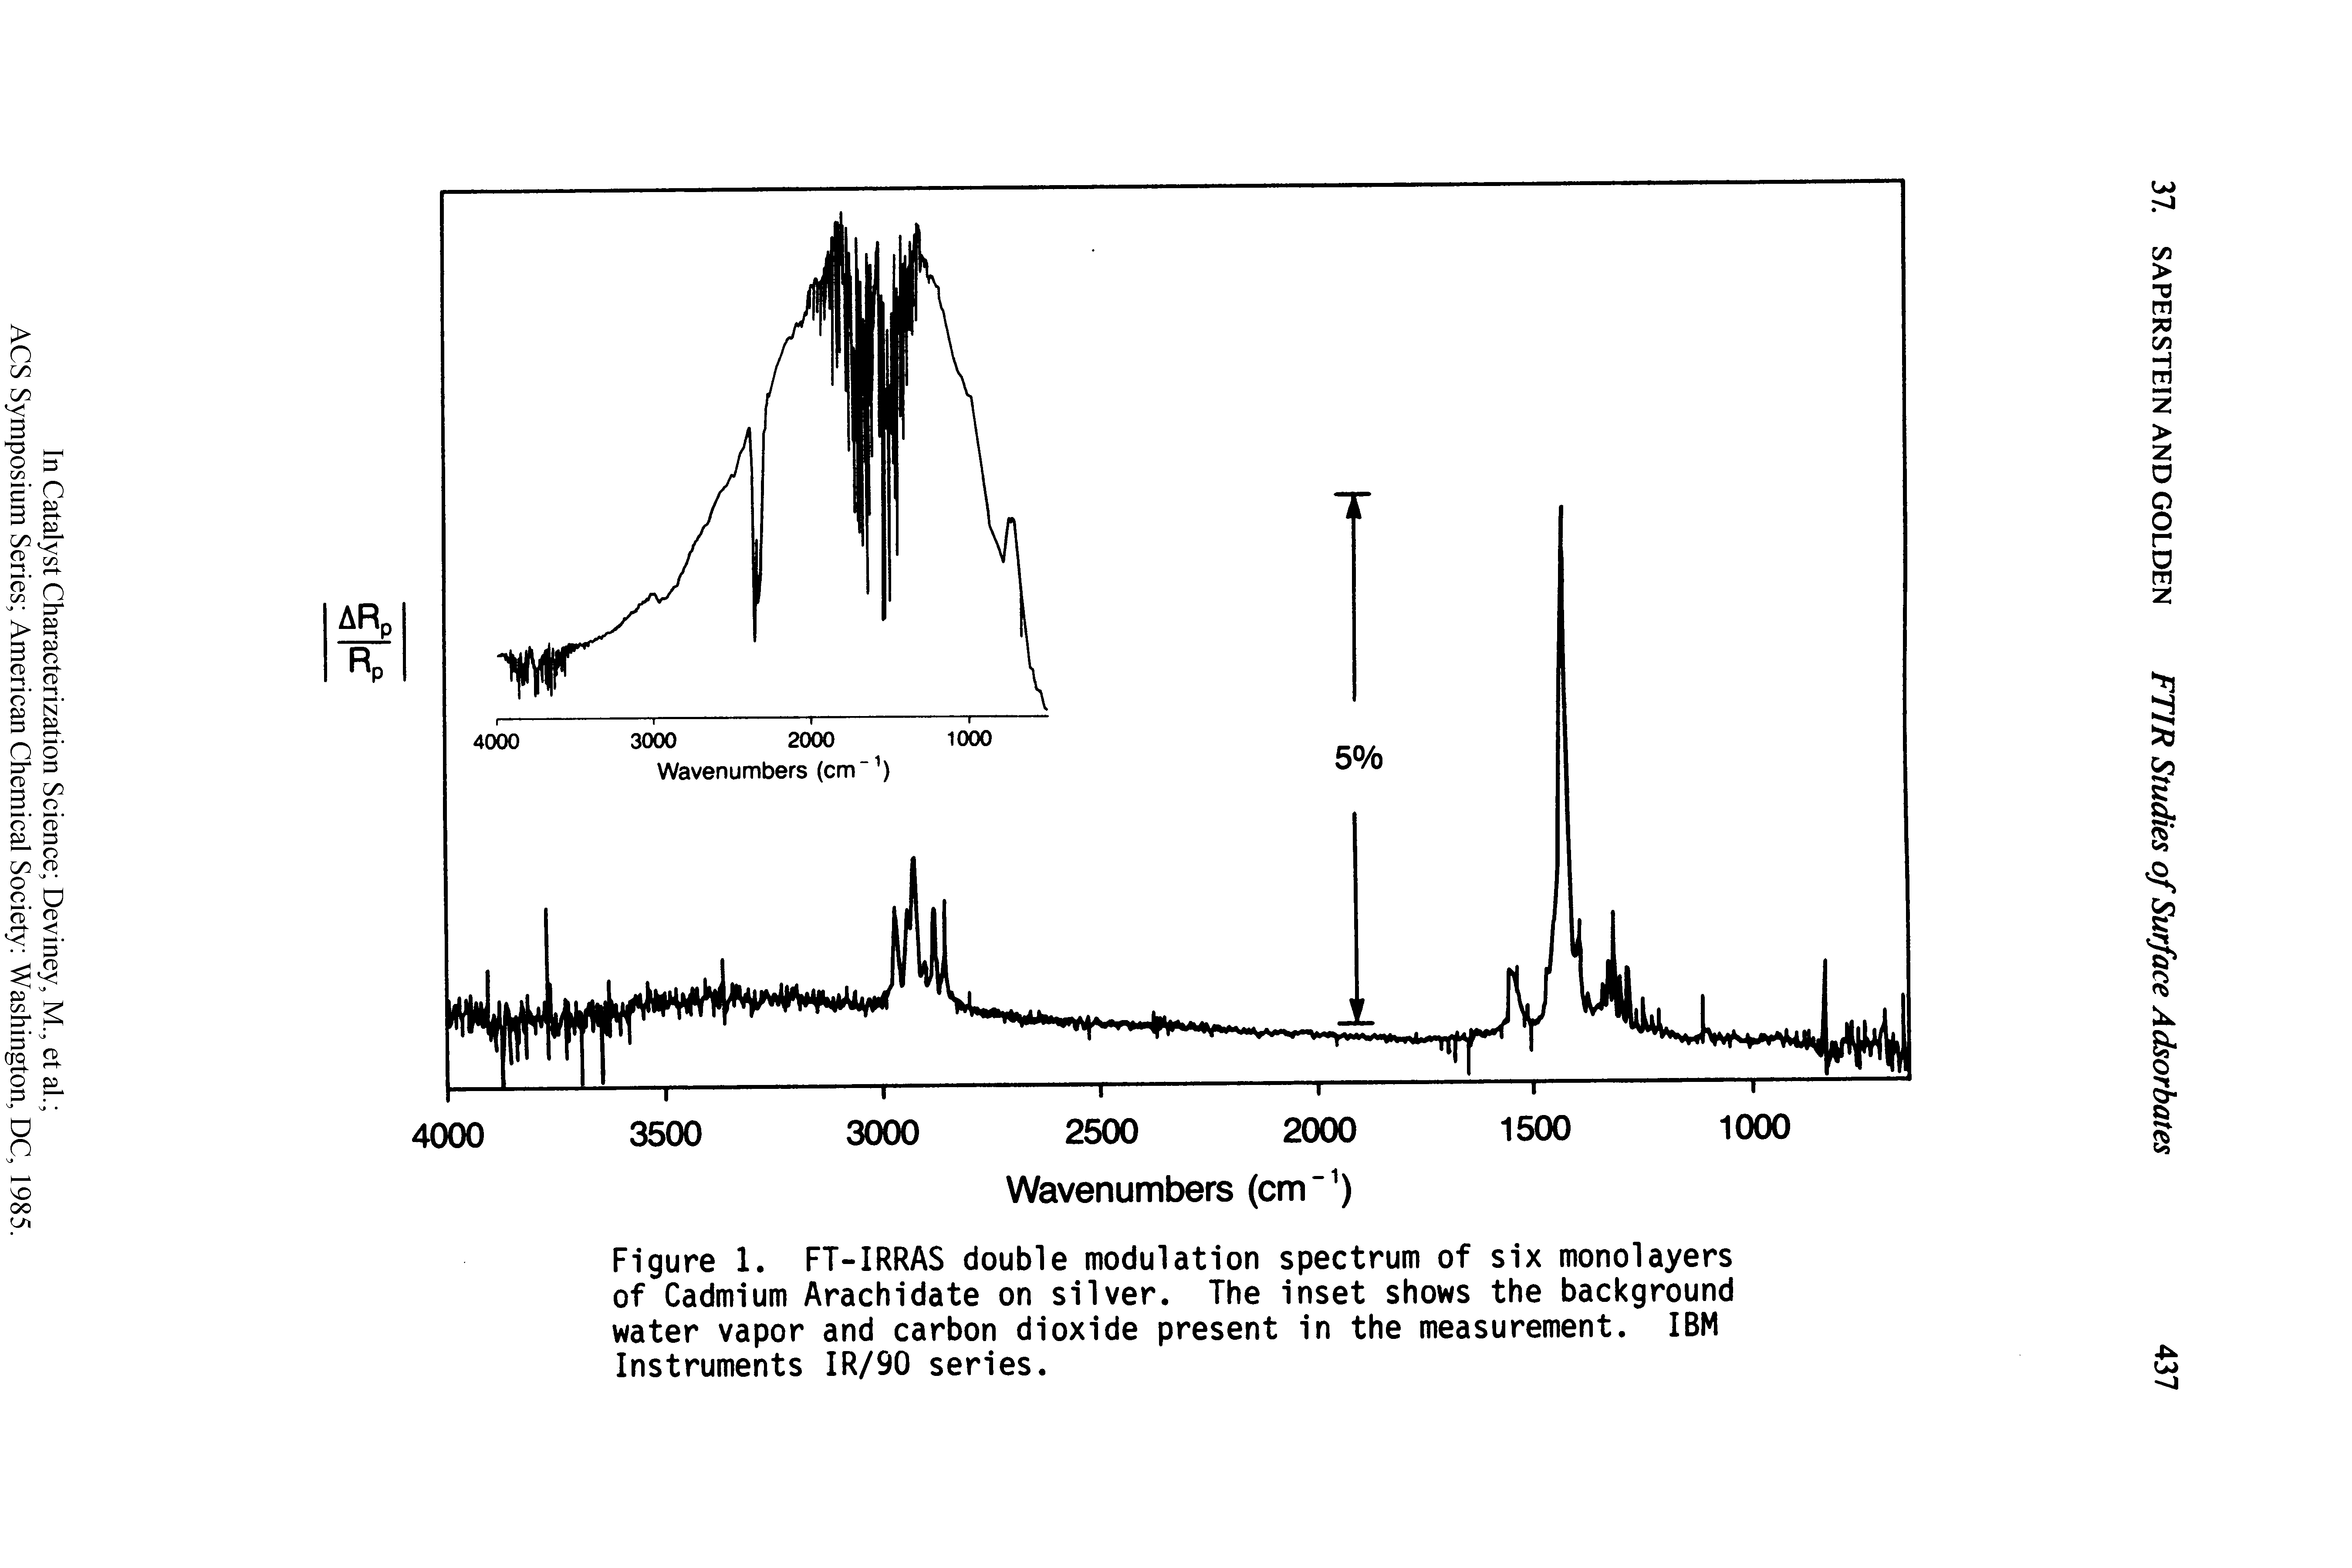 Figure 1. FT-IRRAS double modulation spectrum of six monolayers of Cadmium Arachidate on silver. The inset shows the background water vapor and carbon dioxide present in the measurement. IBM Instruments IR/90 series.